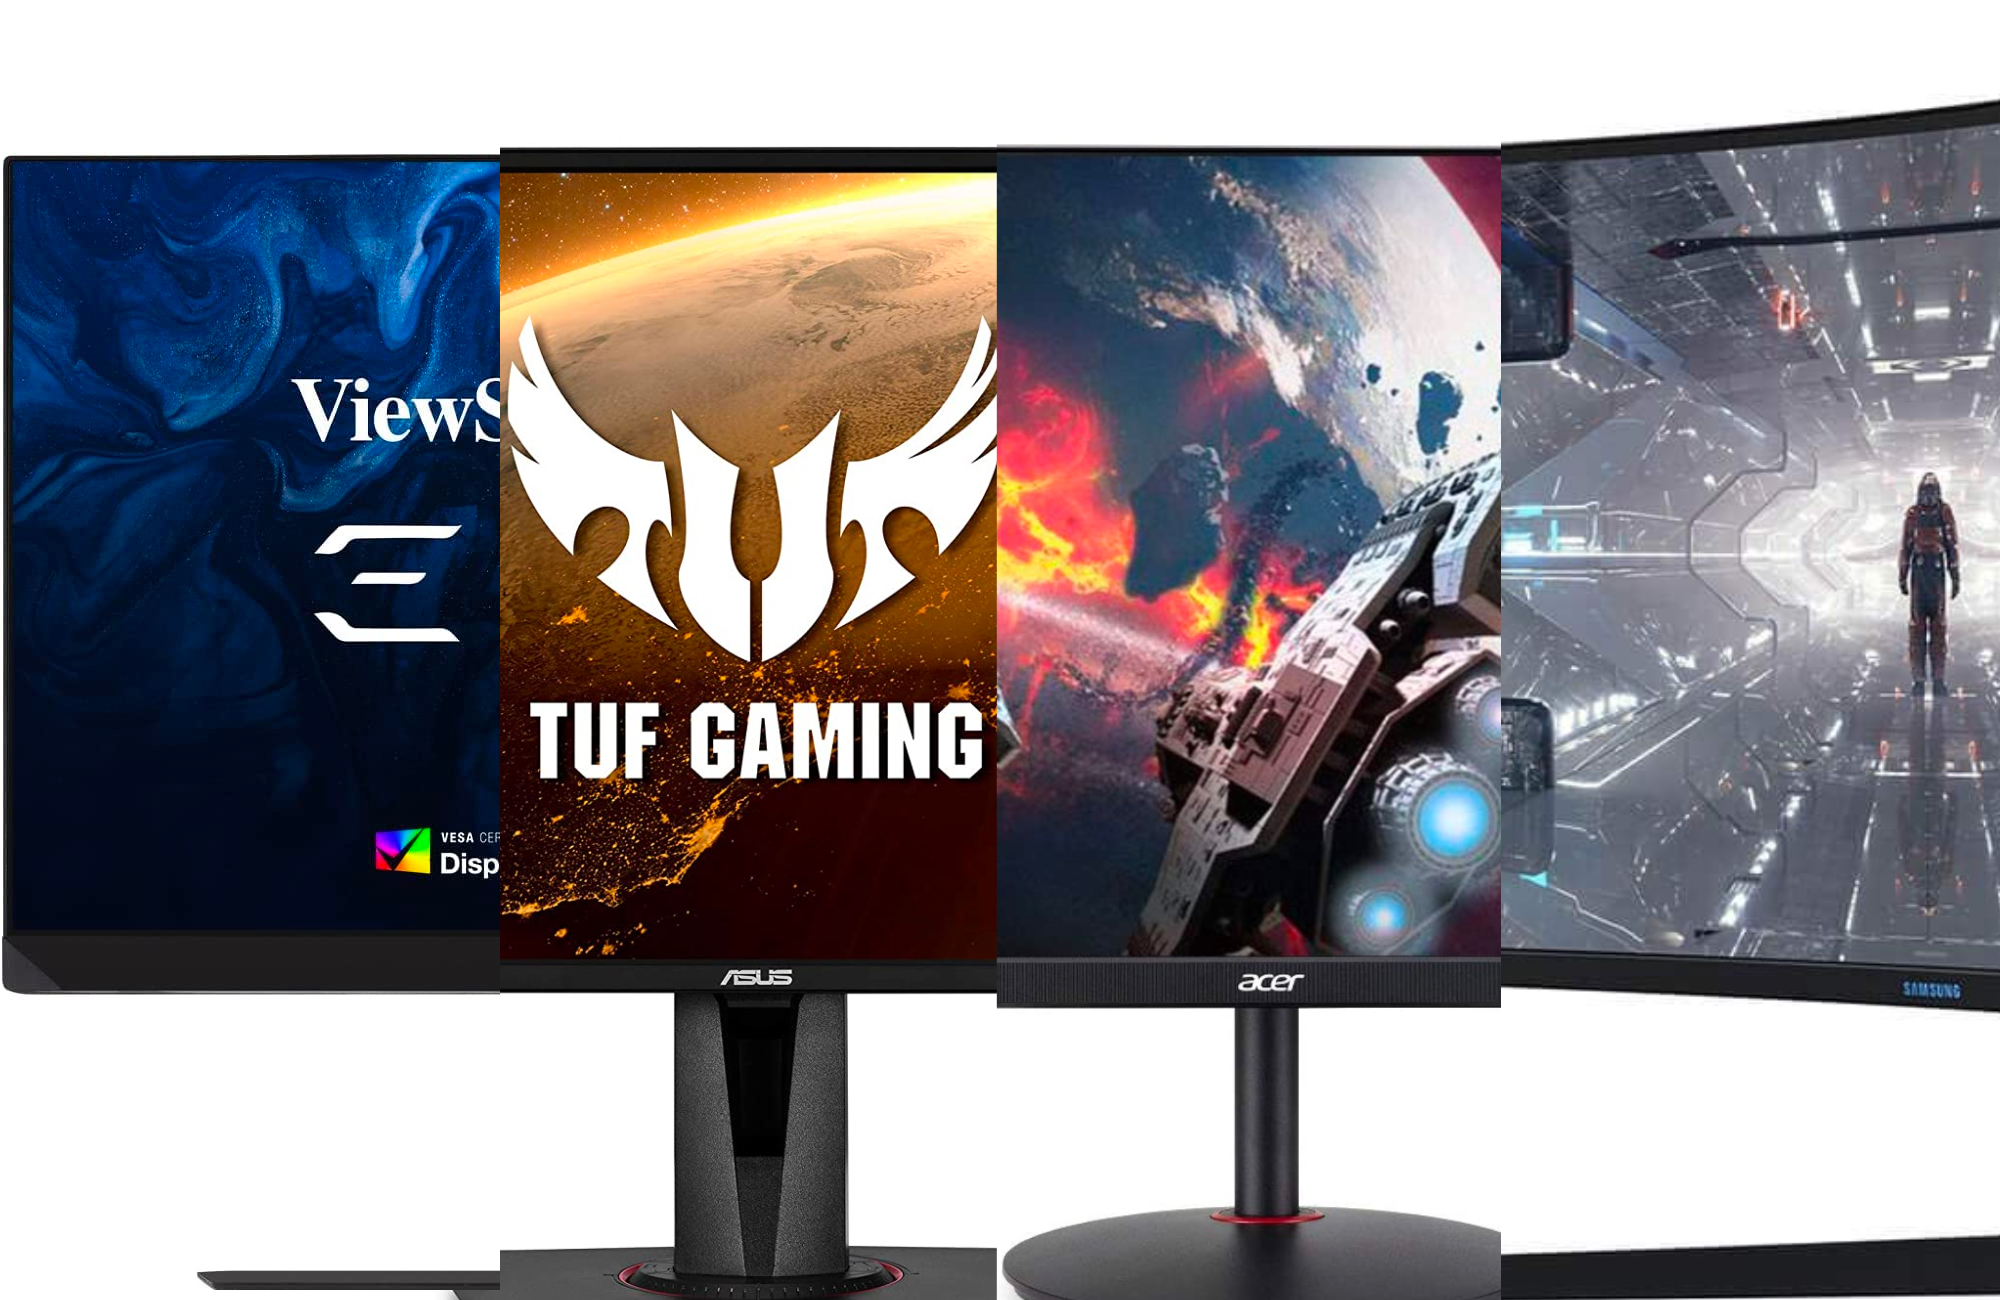 1080p vs 1440p: What's the best value gaming monitor resolution in 2023?